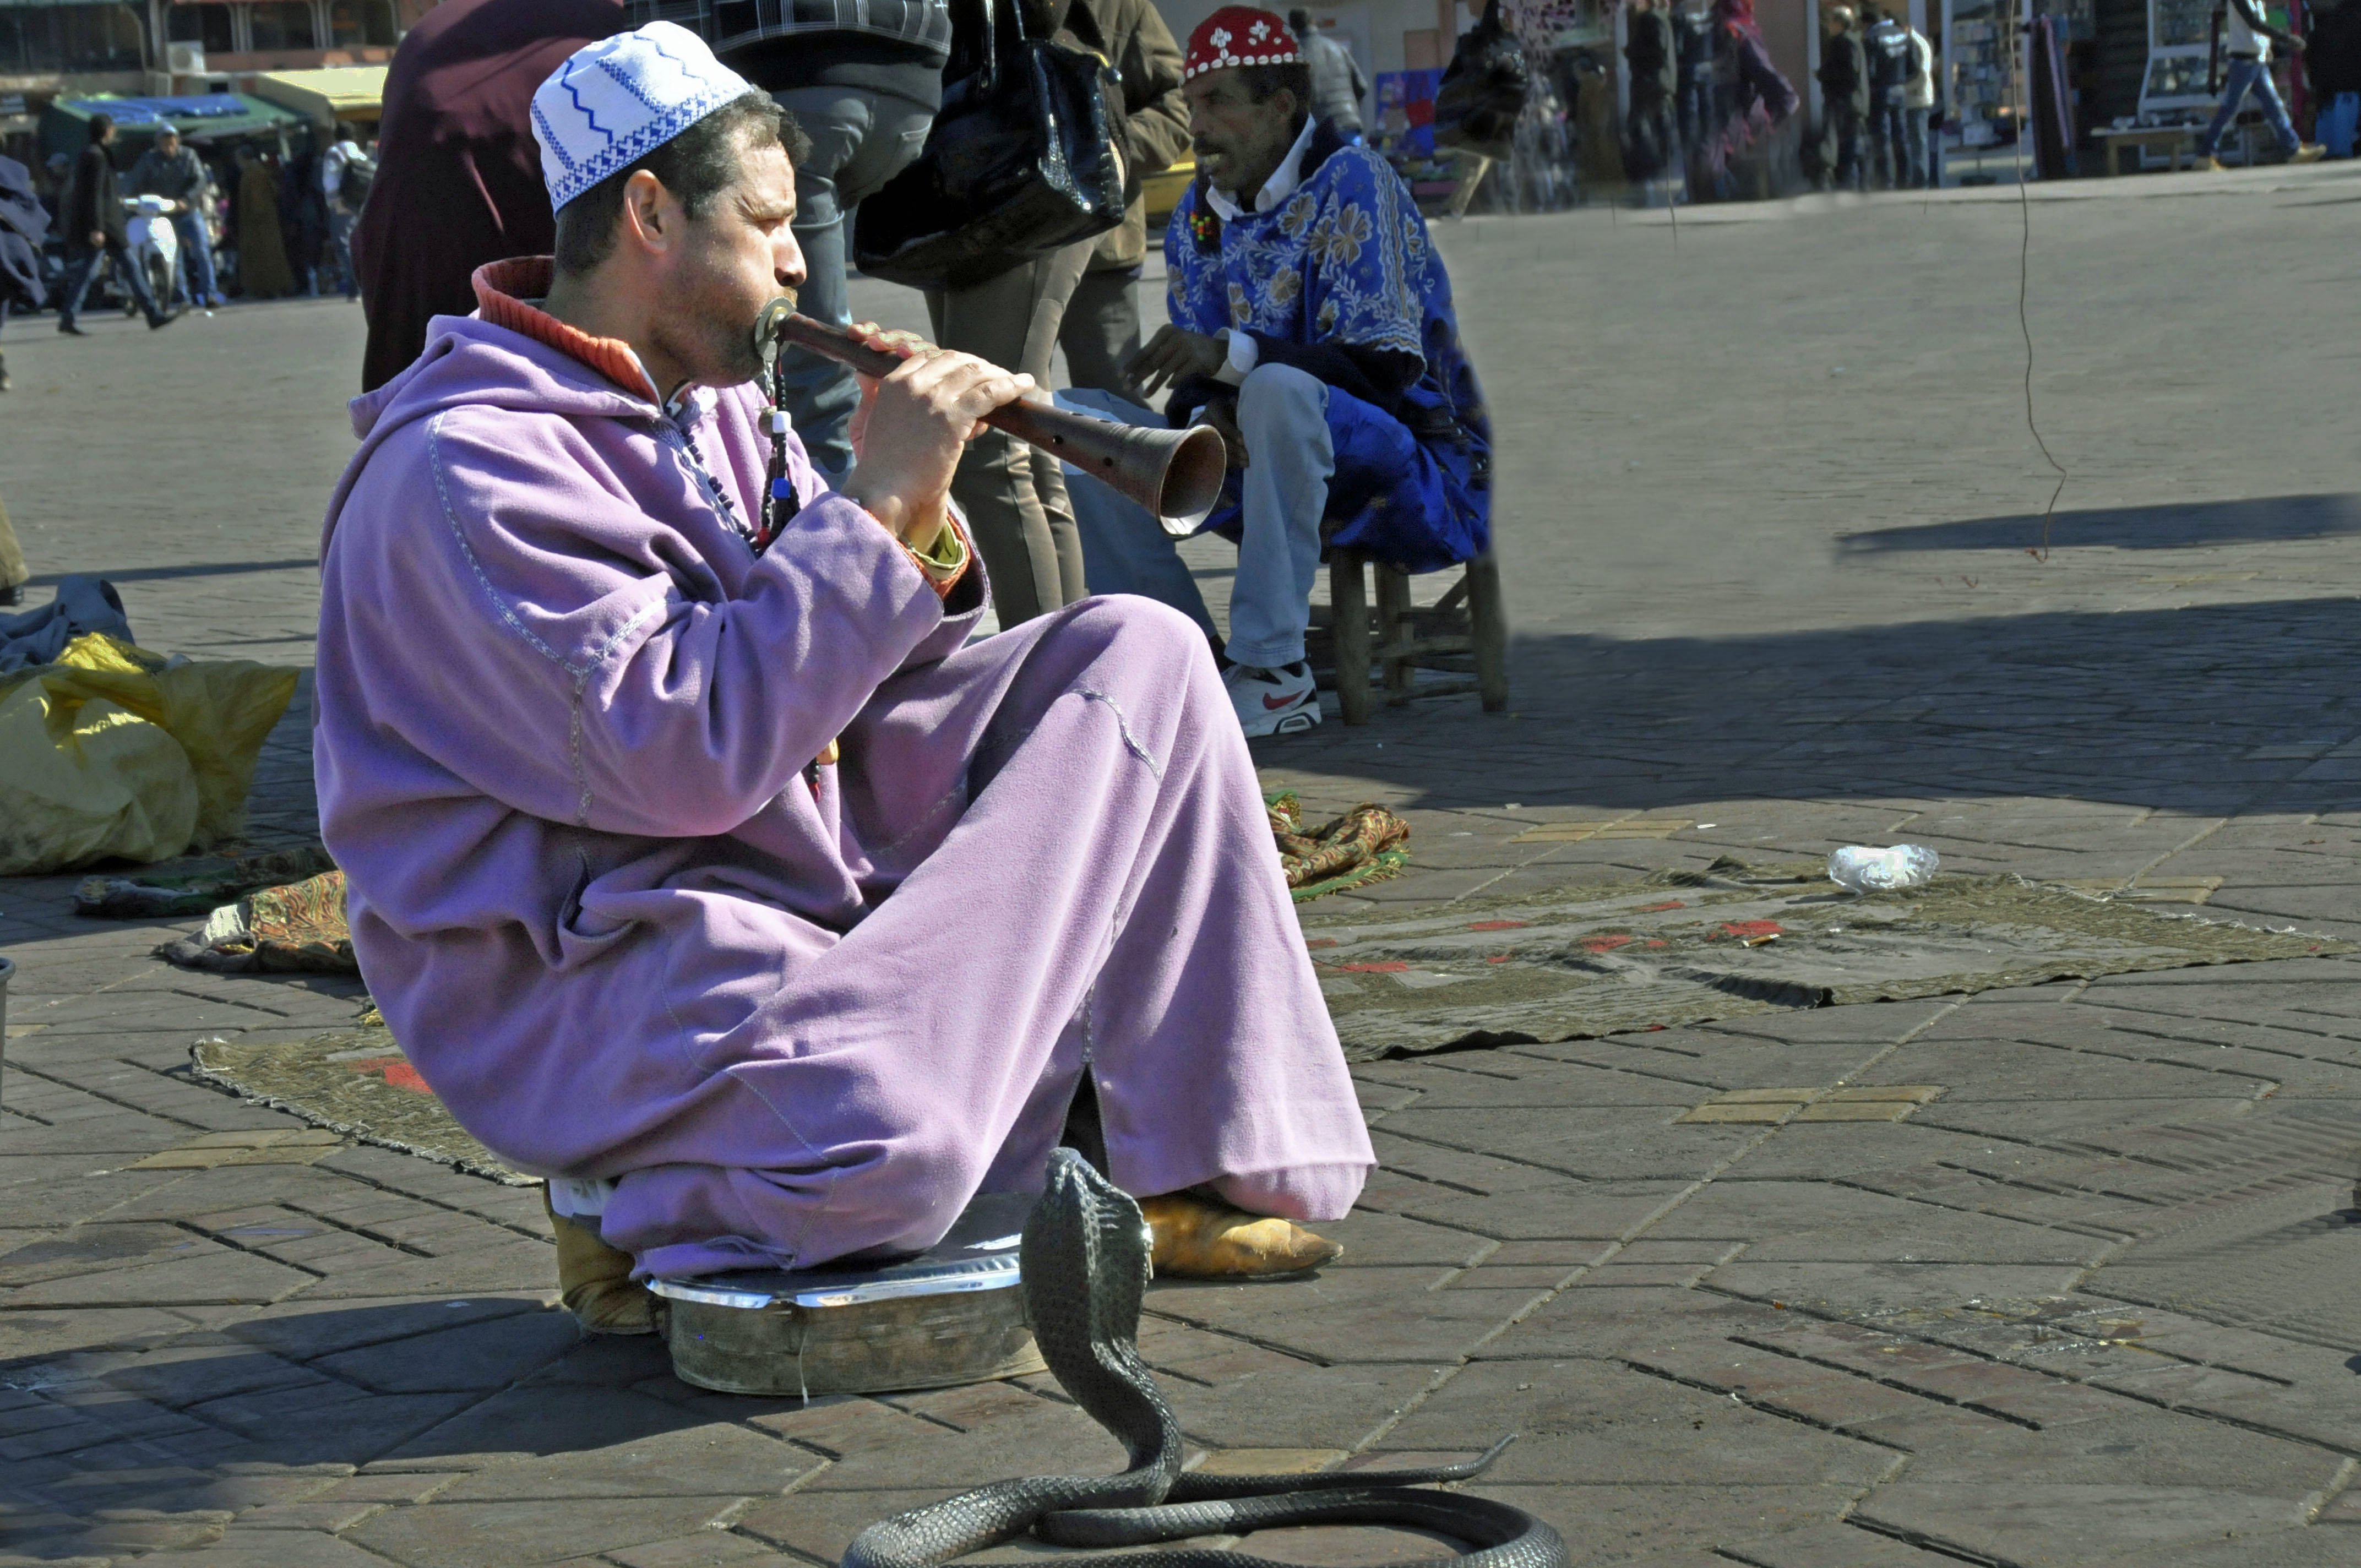 Snake Charmer on the Square in Marrakesh, Morocco. (Photo by Don Knebel)